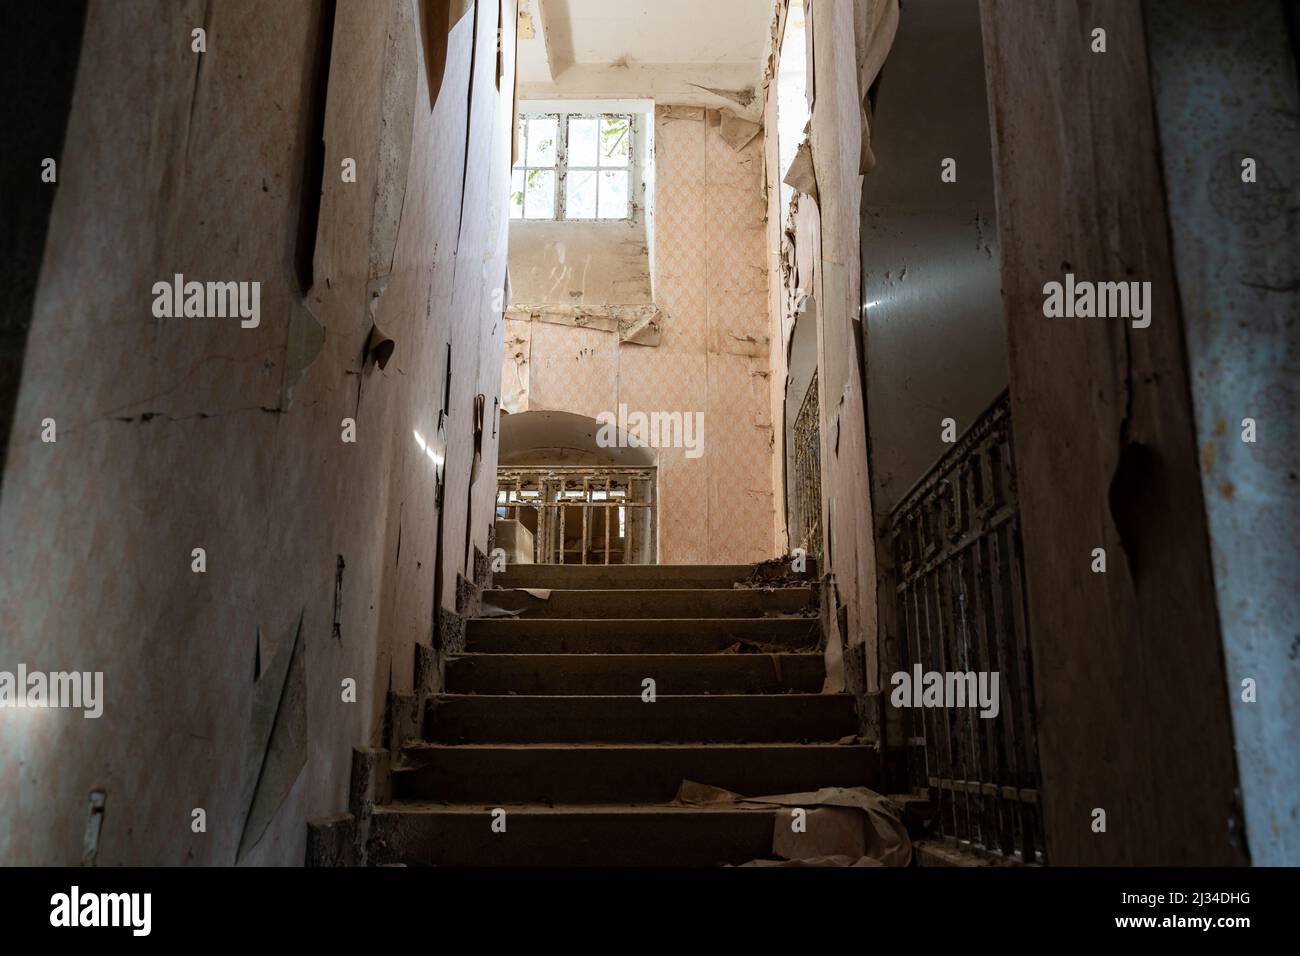 Dark staircase in an abandoned building. Wallpaper are peeling off the walls. Dirty steps upwards to the next floor. Interior in bad condition. Stock Photo